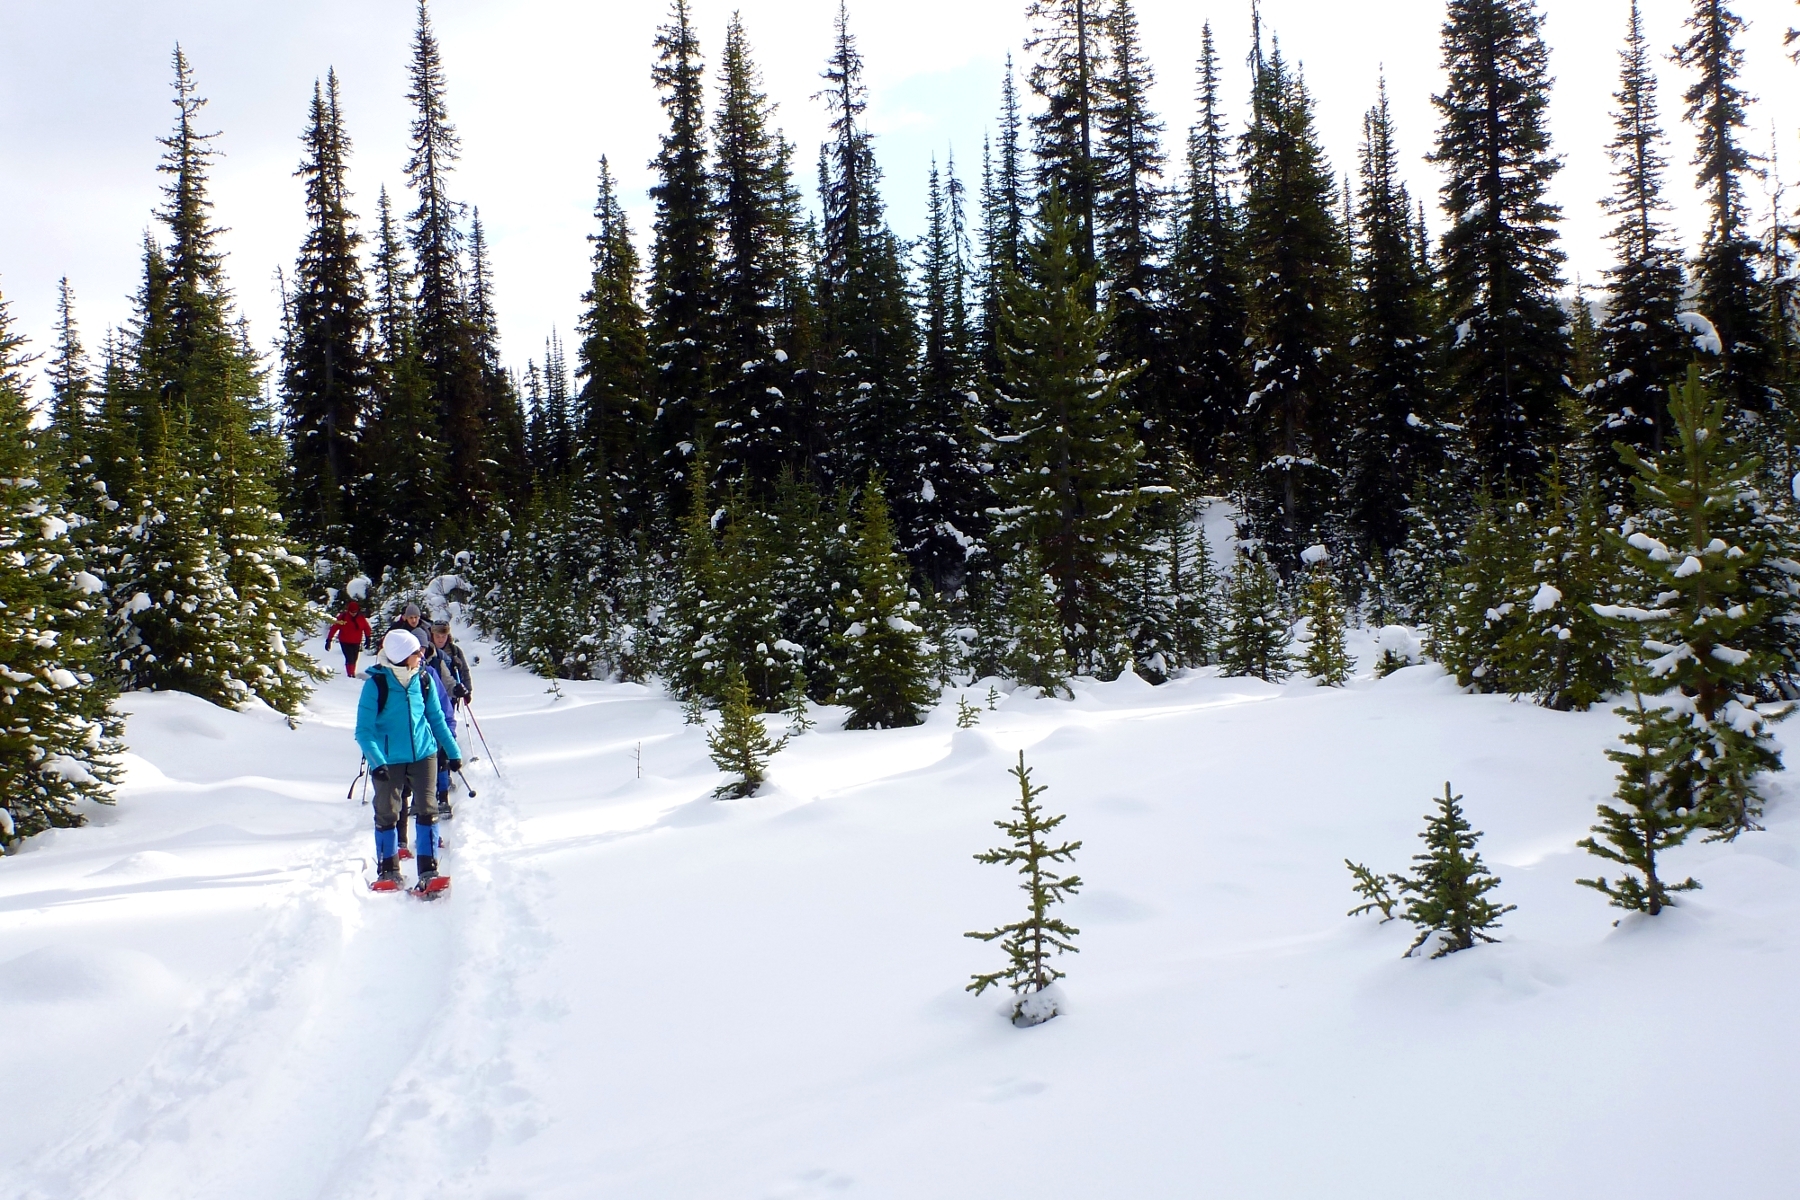 Snowshoers walk through a forested area